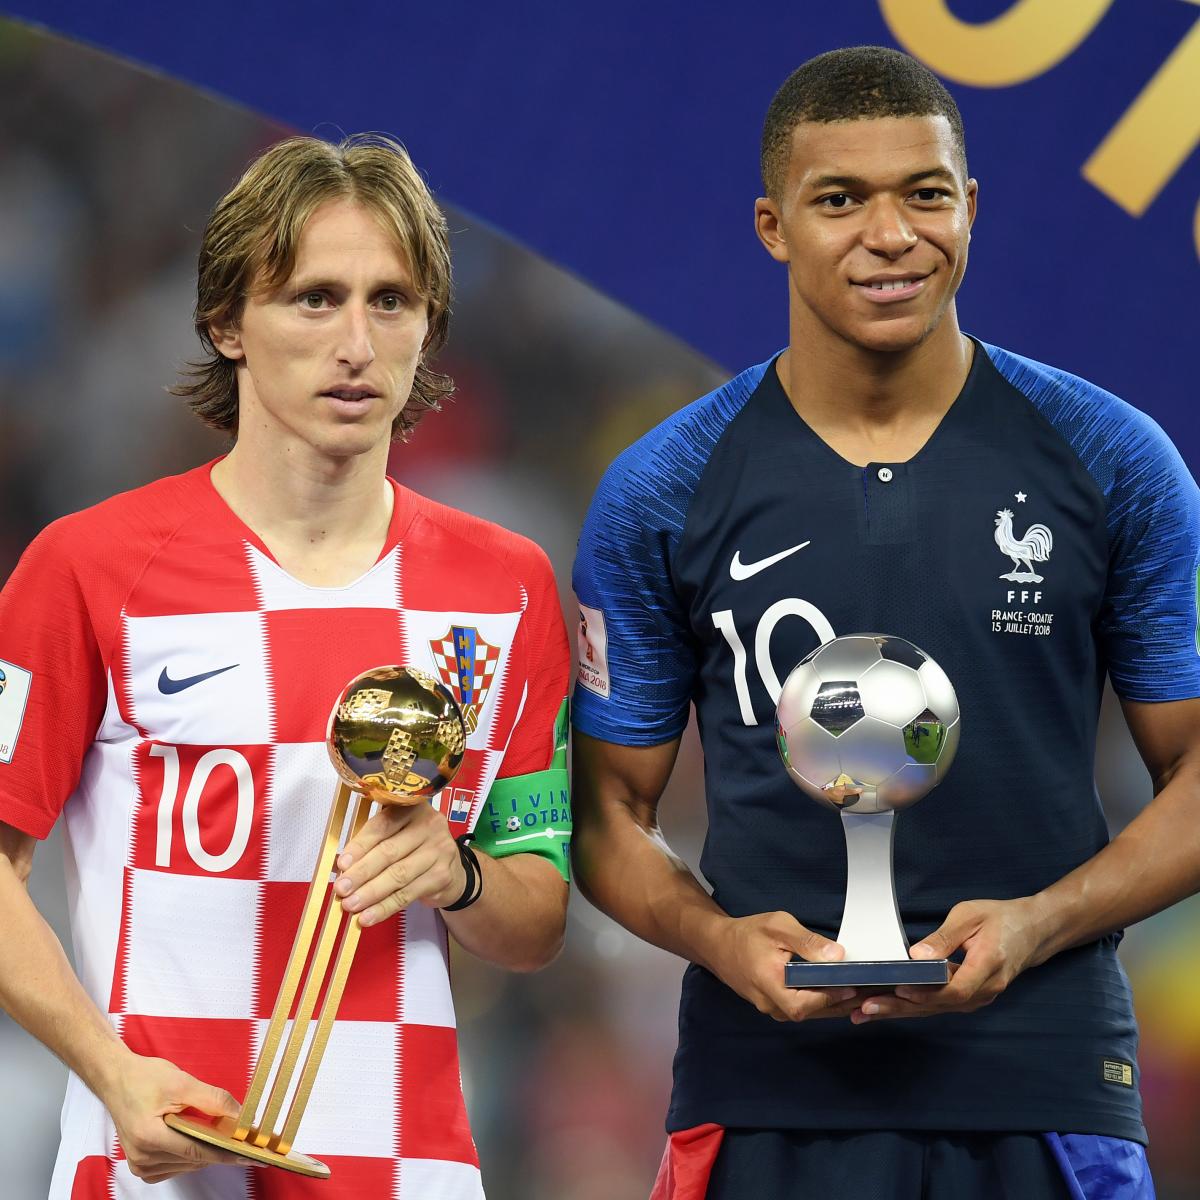 World Cup 2018: Vive La France and World Cup Awards - The Ringer